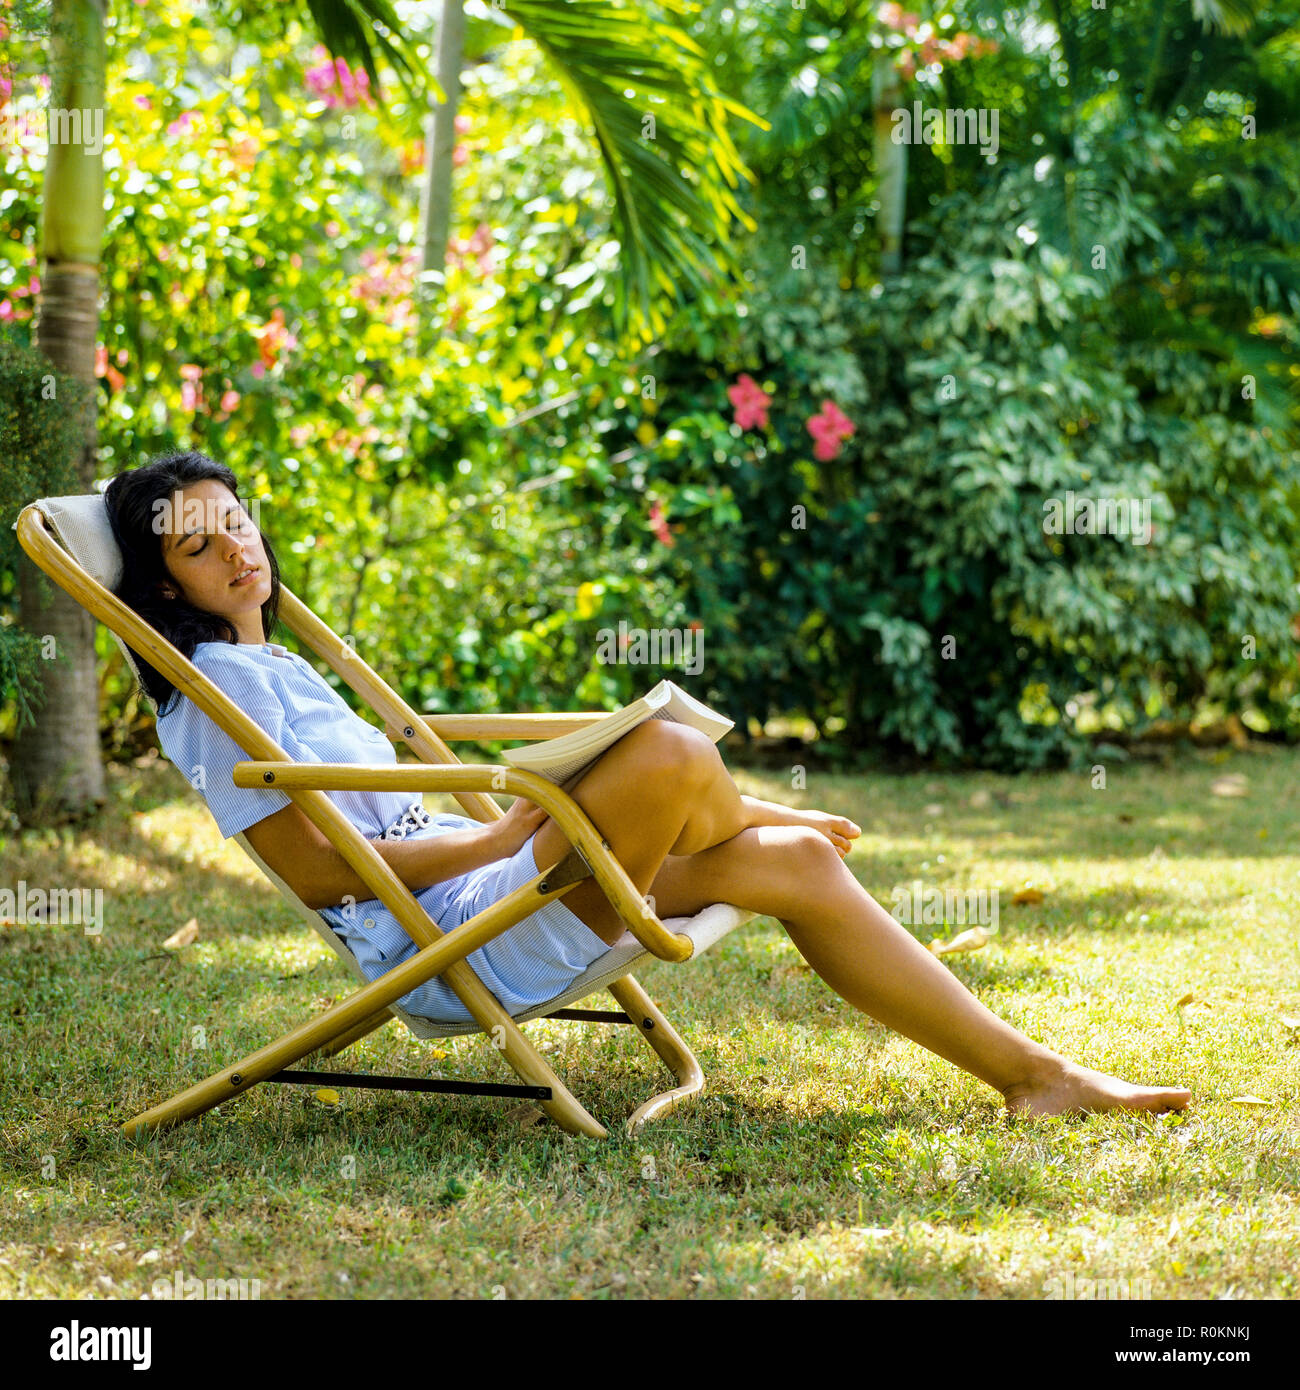 Giovane donna napping in sedia a sdraio, giardino tropicale, Guadalupa, French West Indies, Foto Stock